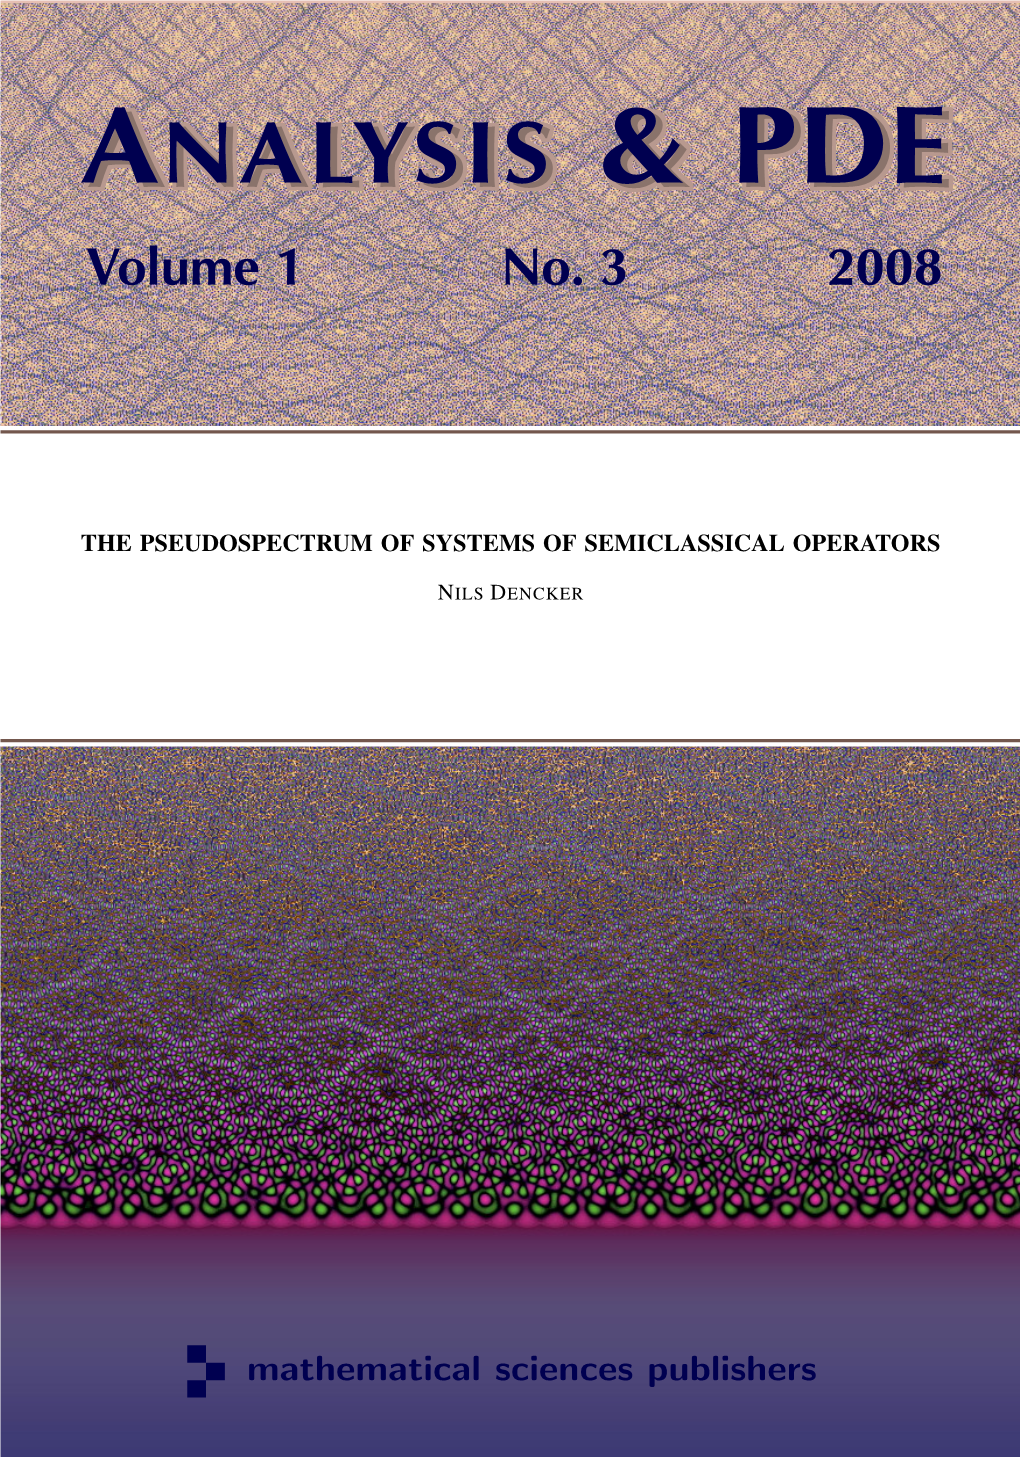 The Pseudospectrum of Systems of Semiclassical Operators